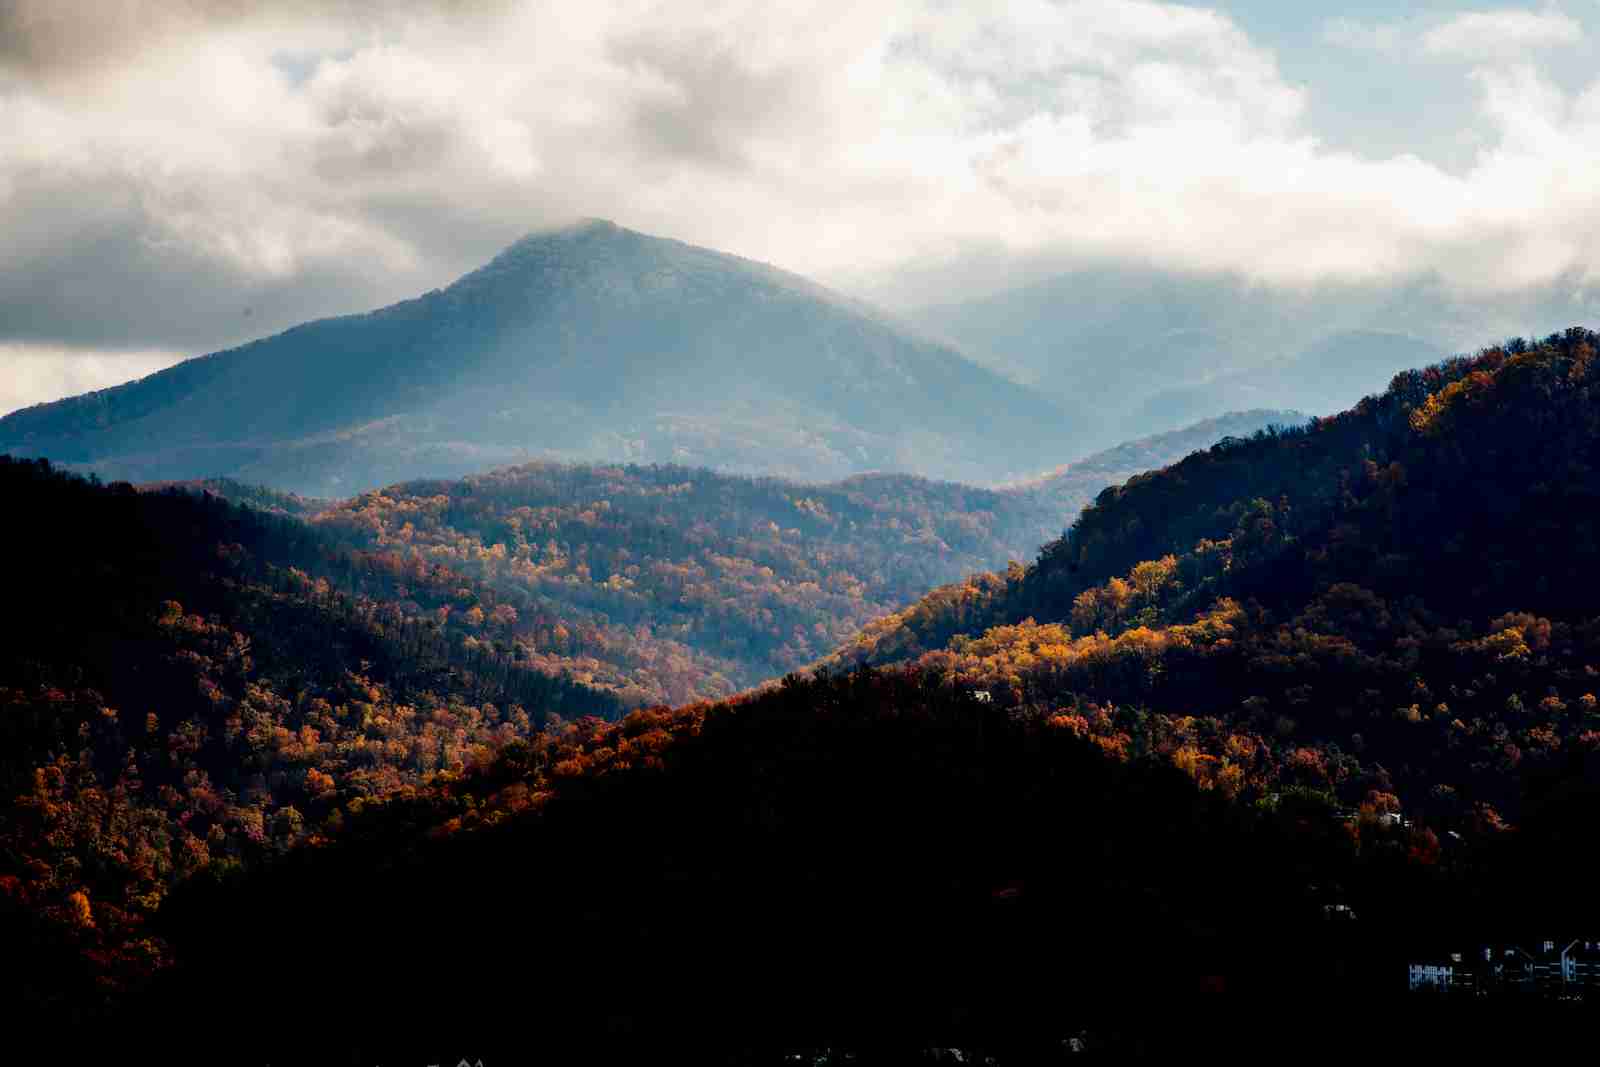 Great Smoky Mountains National Park. (Photo by Patrick Gorski/NurPhoto/Getty Images)